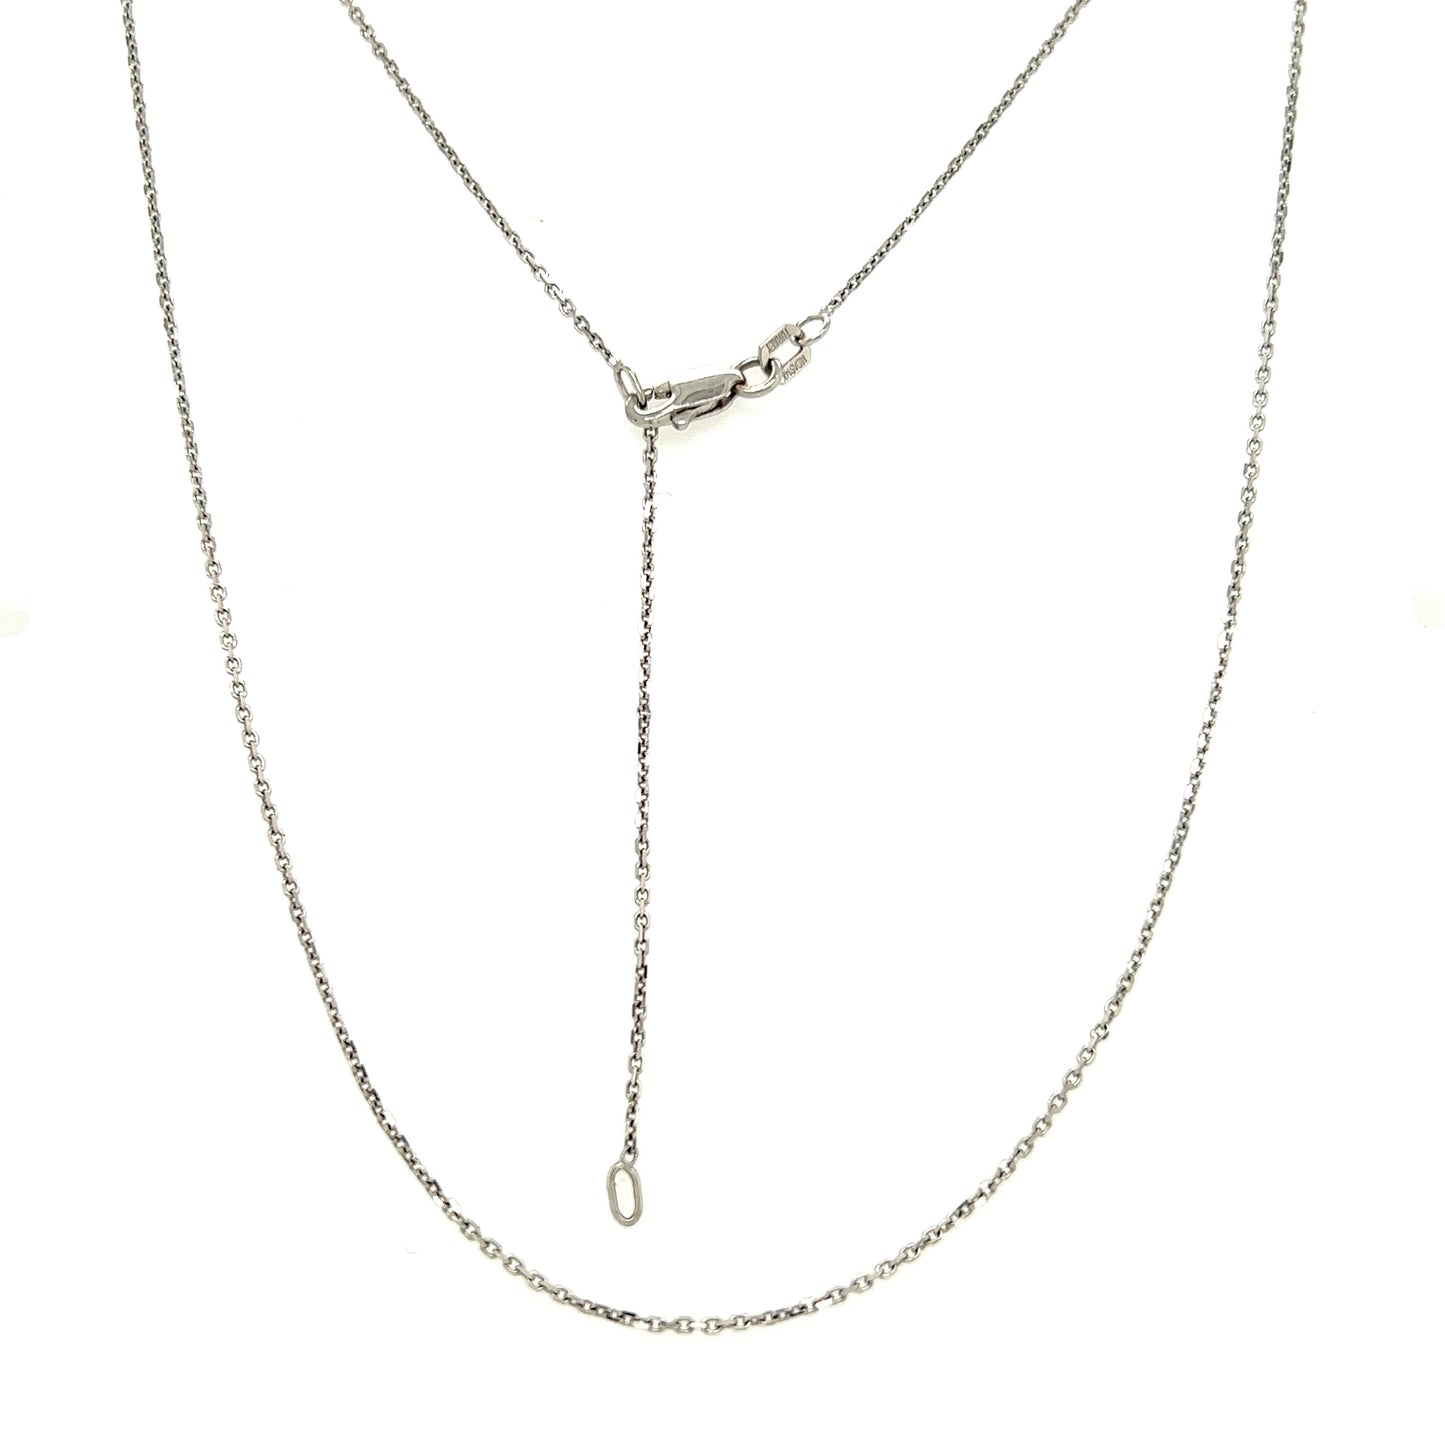 Cable Chain 1.0mm with Adjustable Length in 14K White Gold Full Chain Adjustable Length View